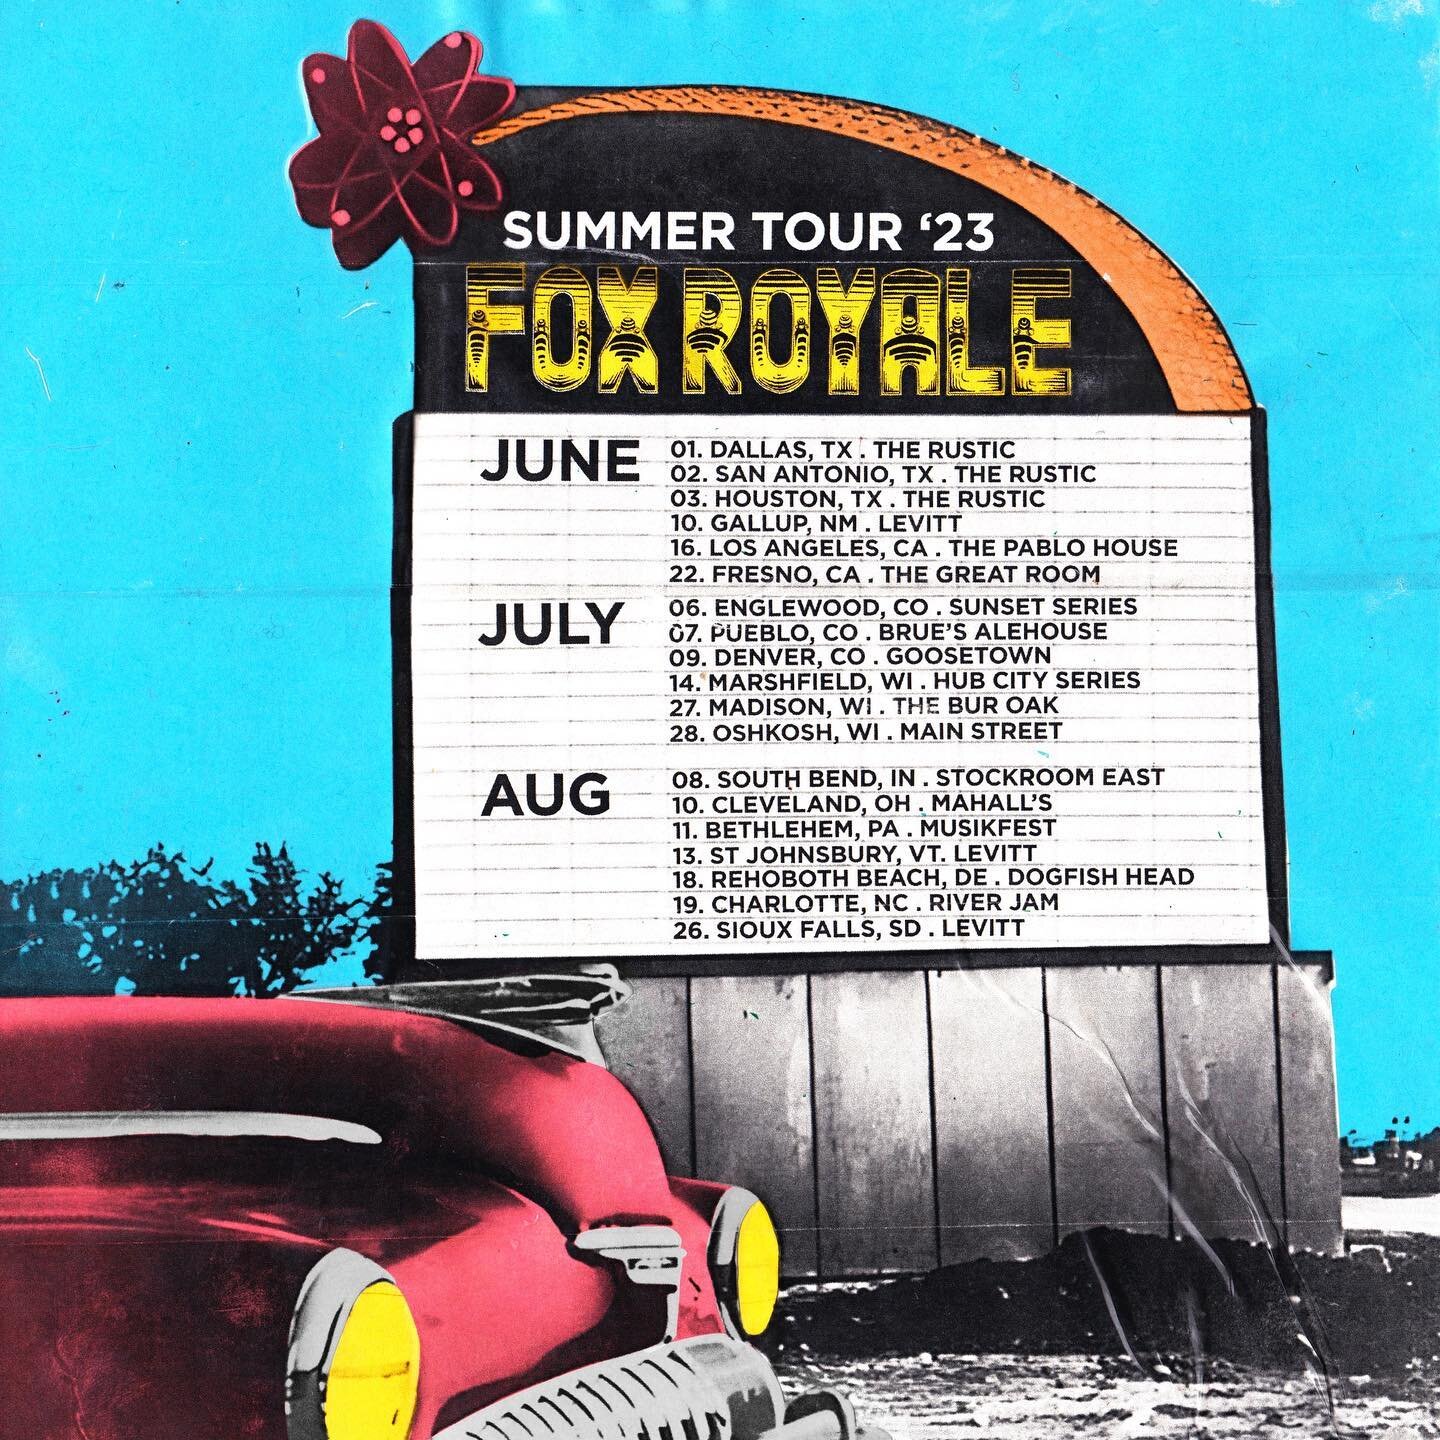 @wearefoxroyale summer tour dates are here!